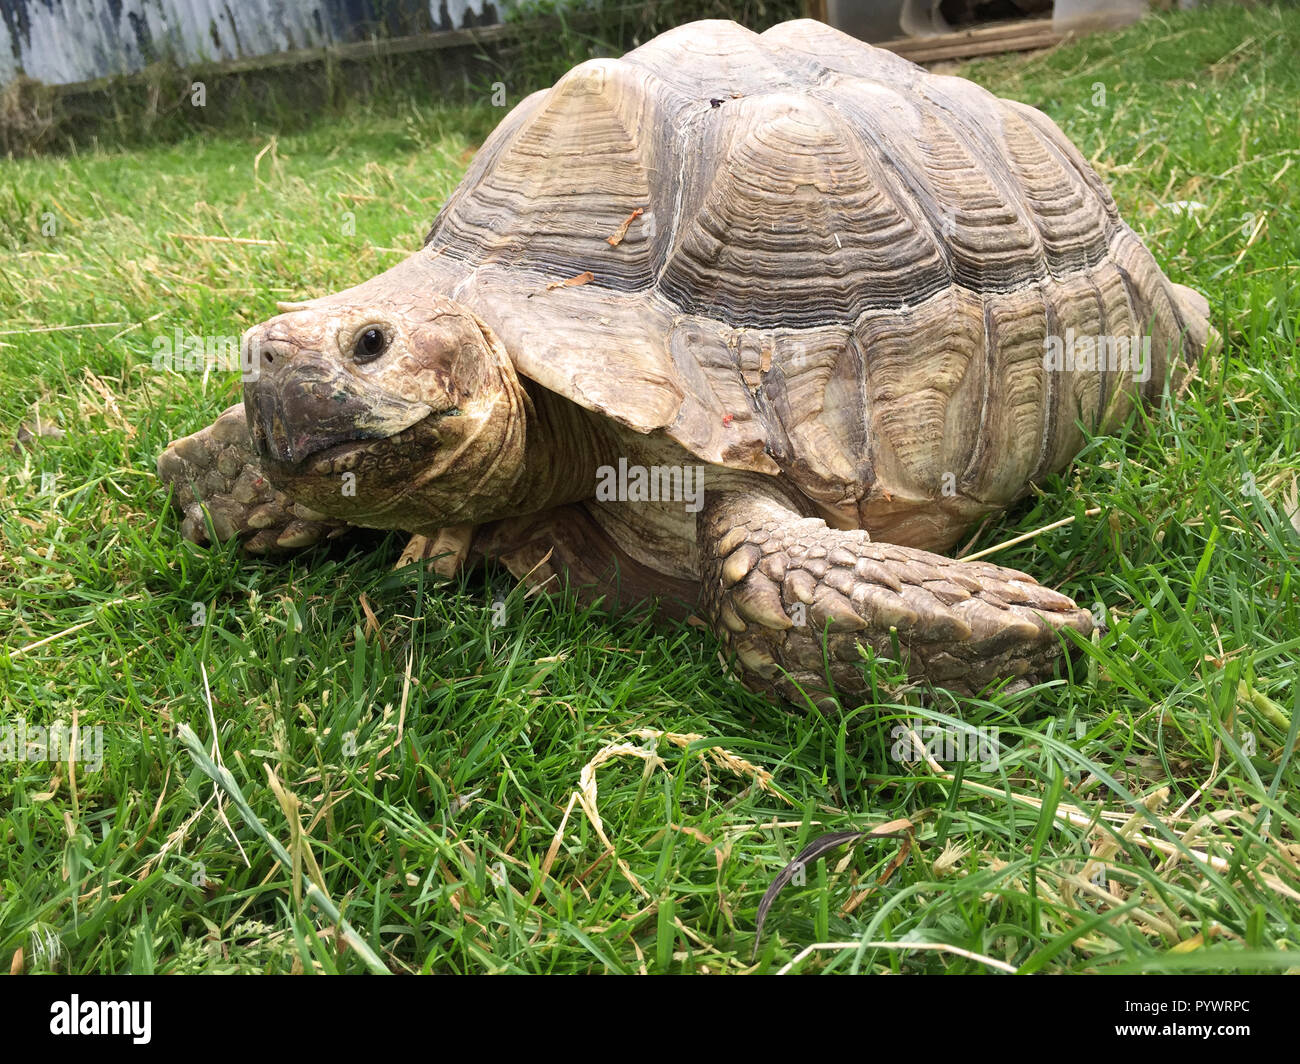 Friendly old tortoise sitting on on green grass Stock Photo